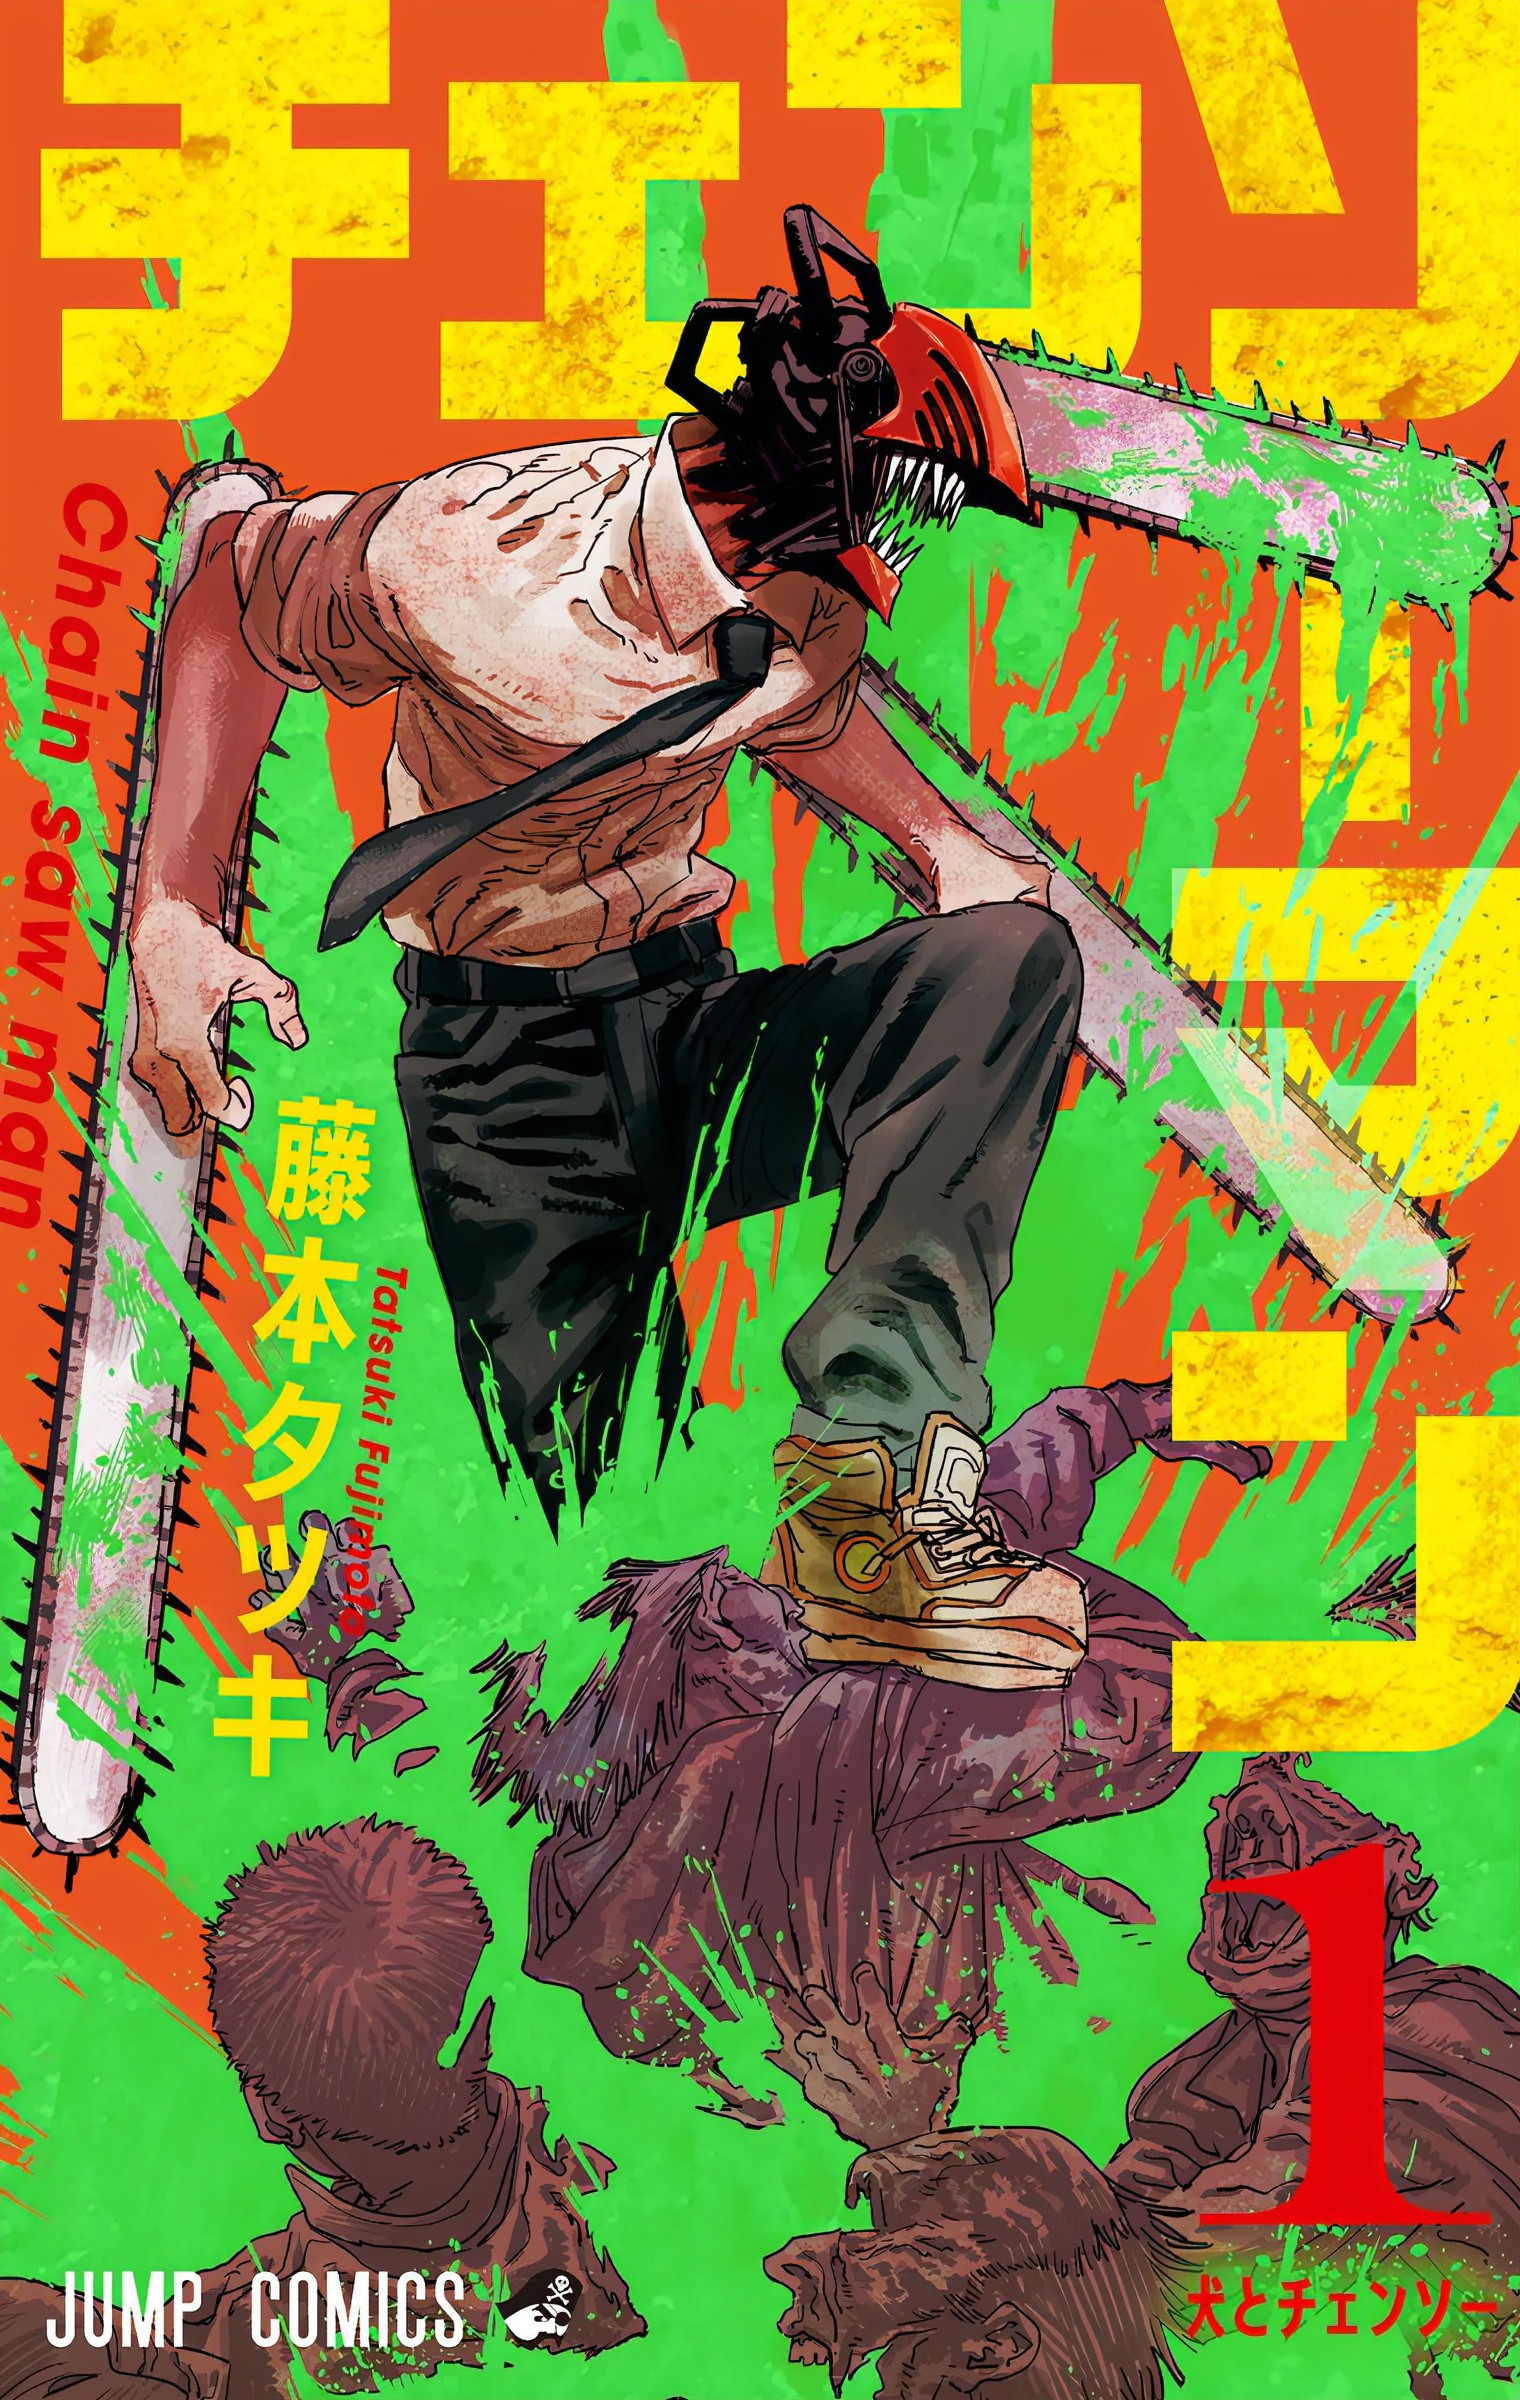 Chainsaw Man Sets Release Date for English Dub